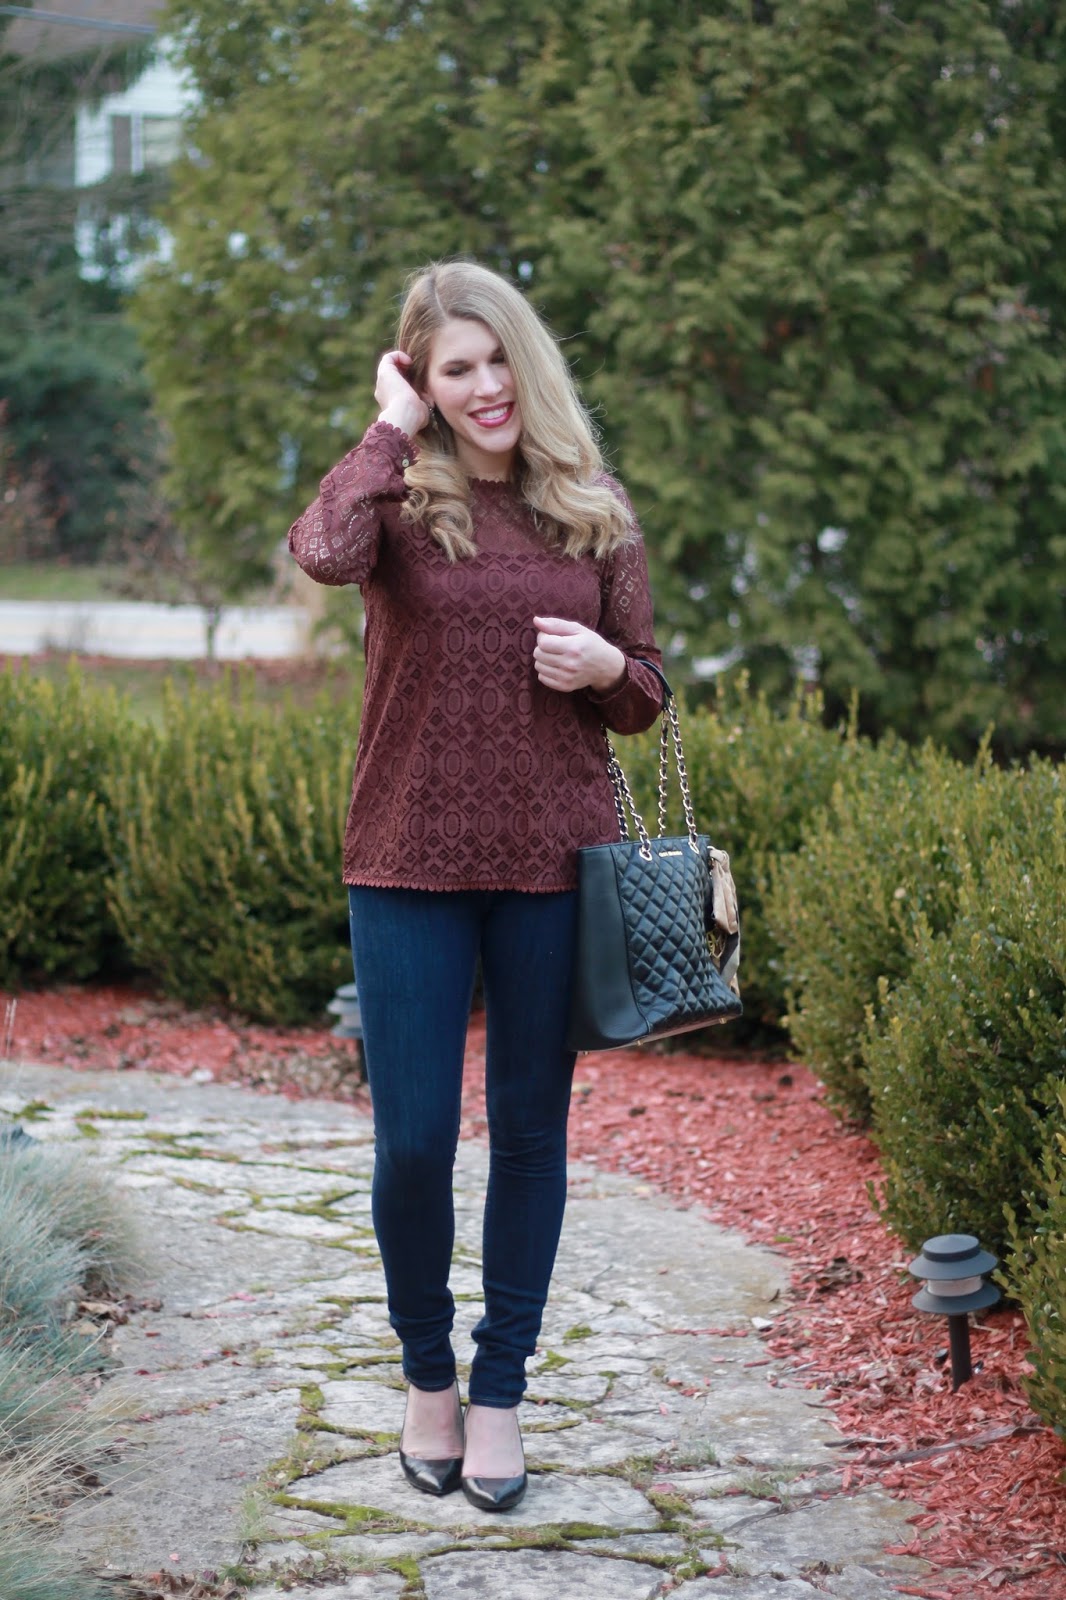 PinkBlush Burgundy Lace Blouse & Confident Twosday Linkup - I do deClaire